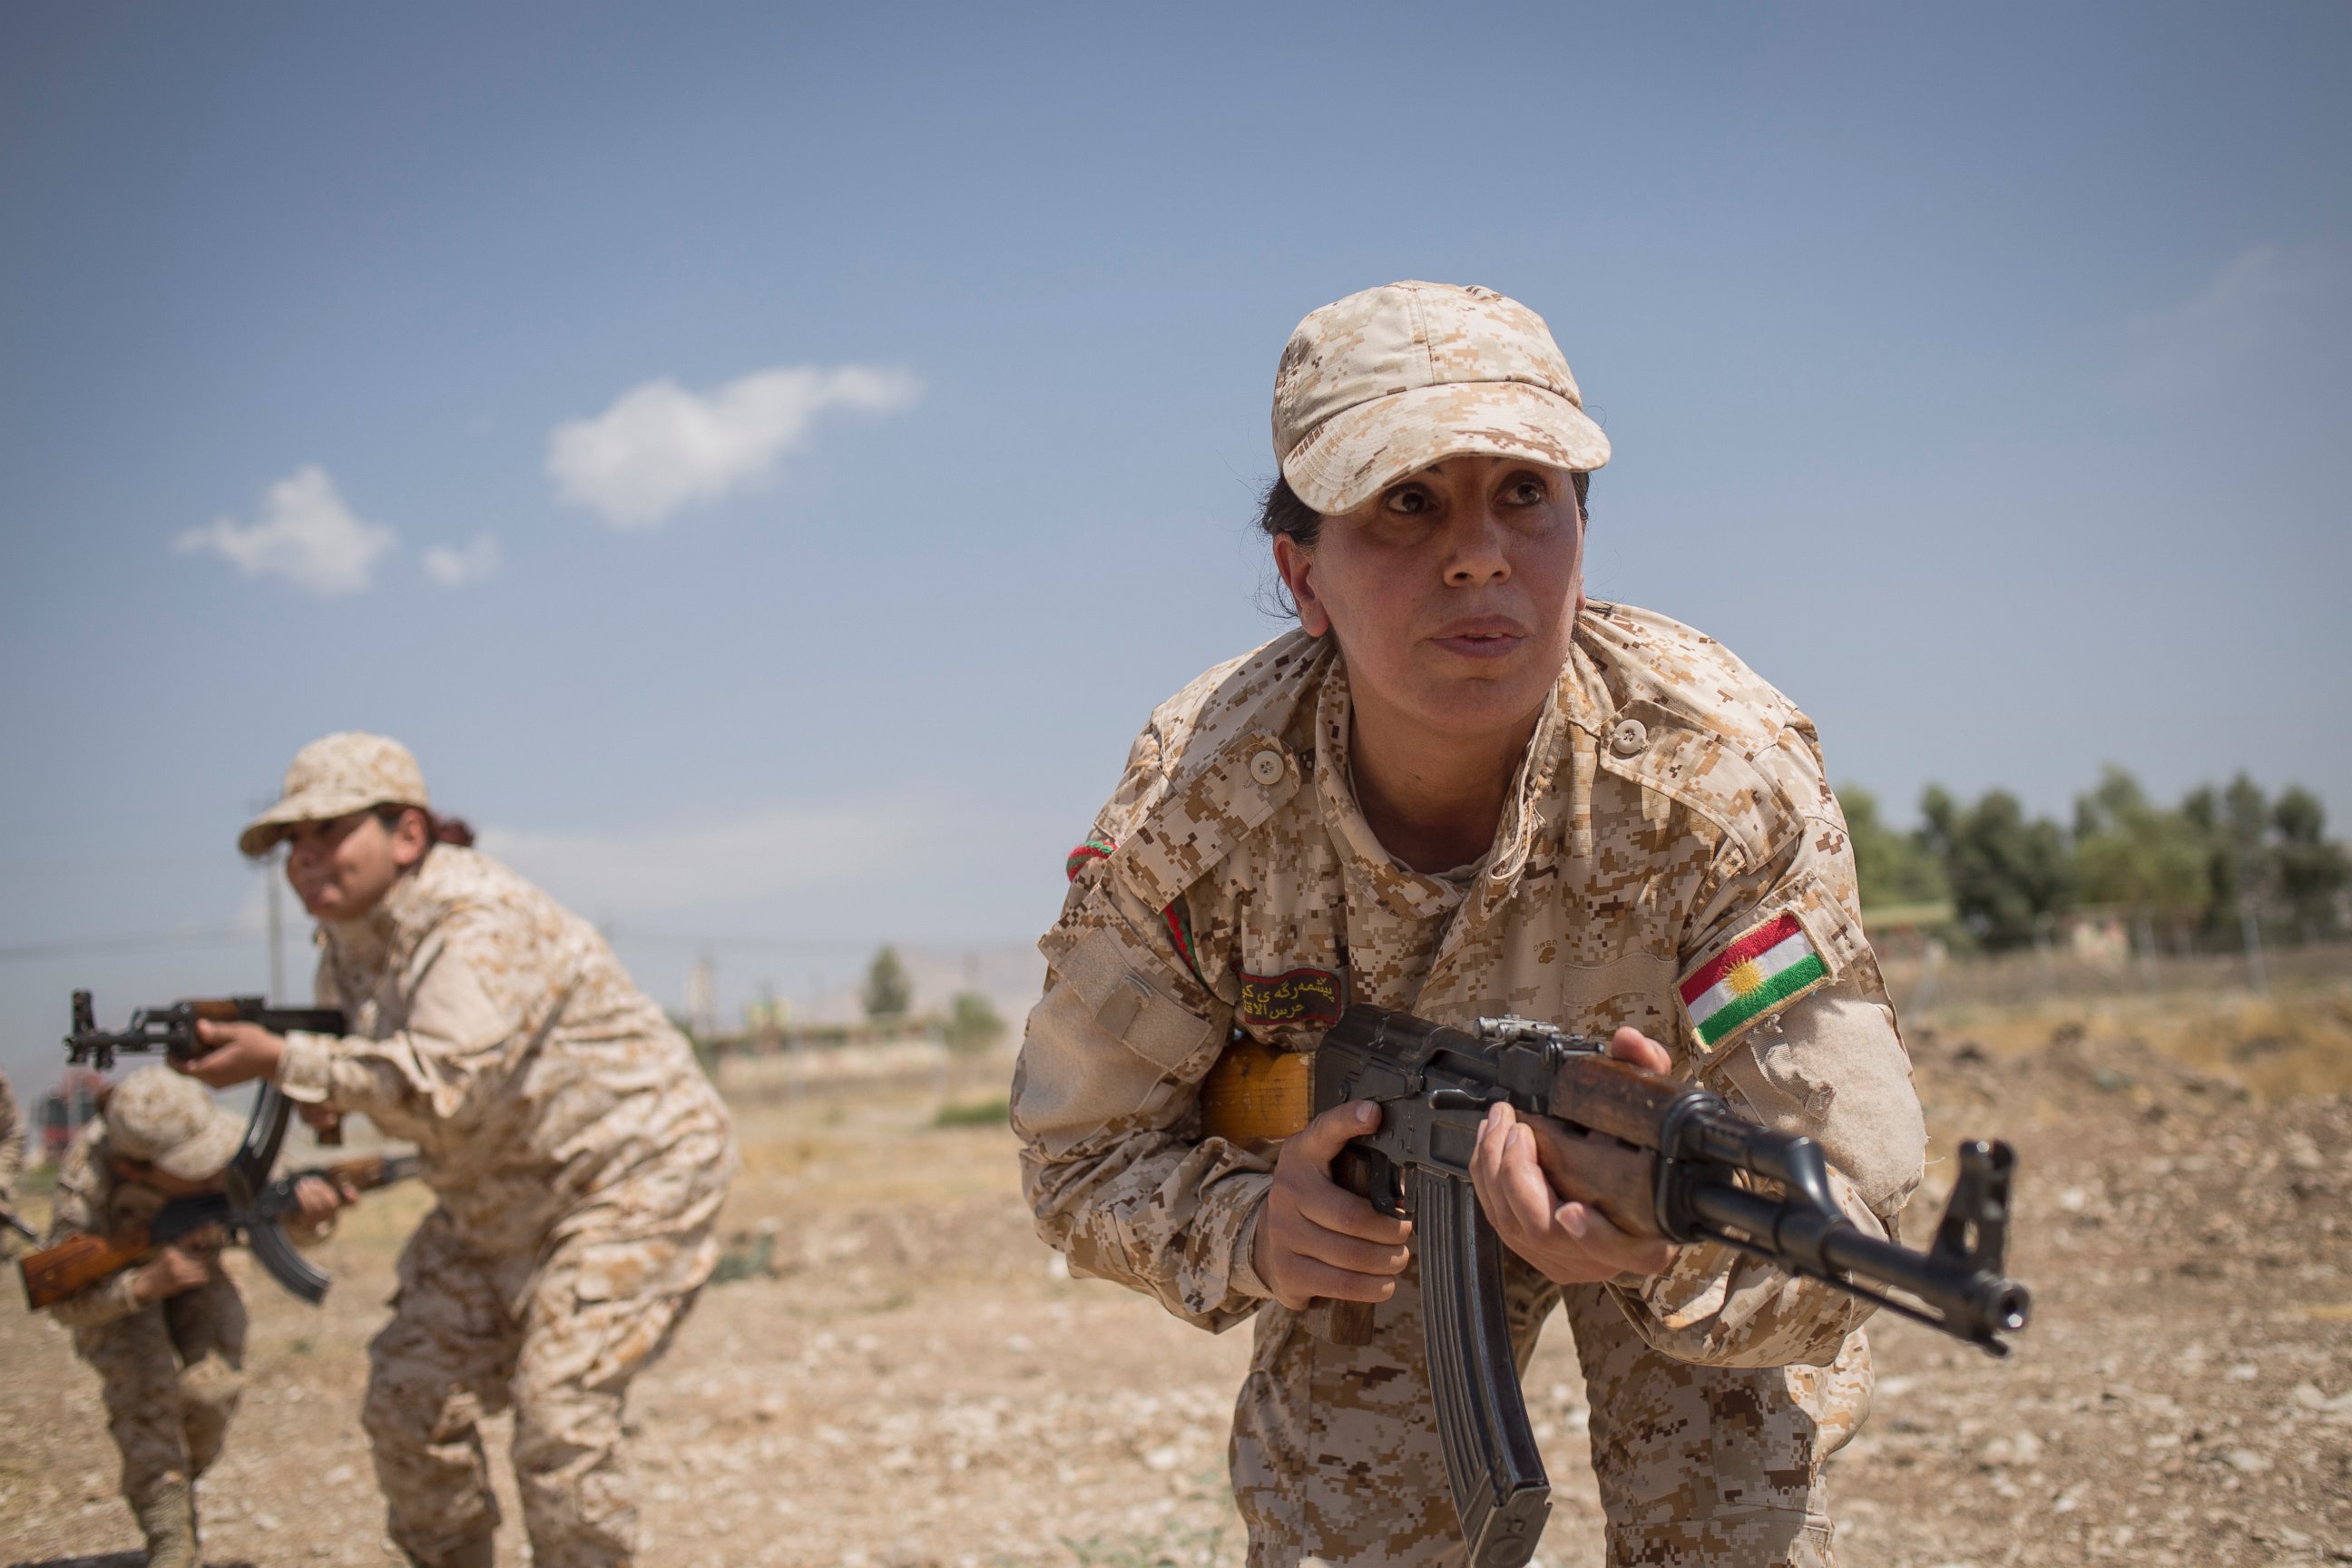 The 2nd Battalion of Female Peshmergas during their military exercises at Sulaymaniyah, Aug. 27, 2014.